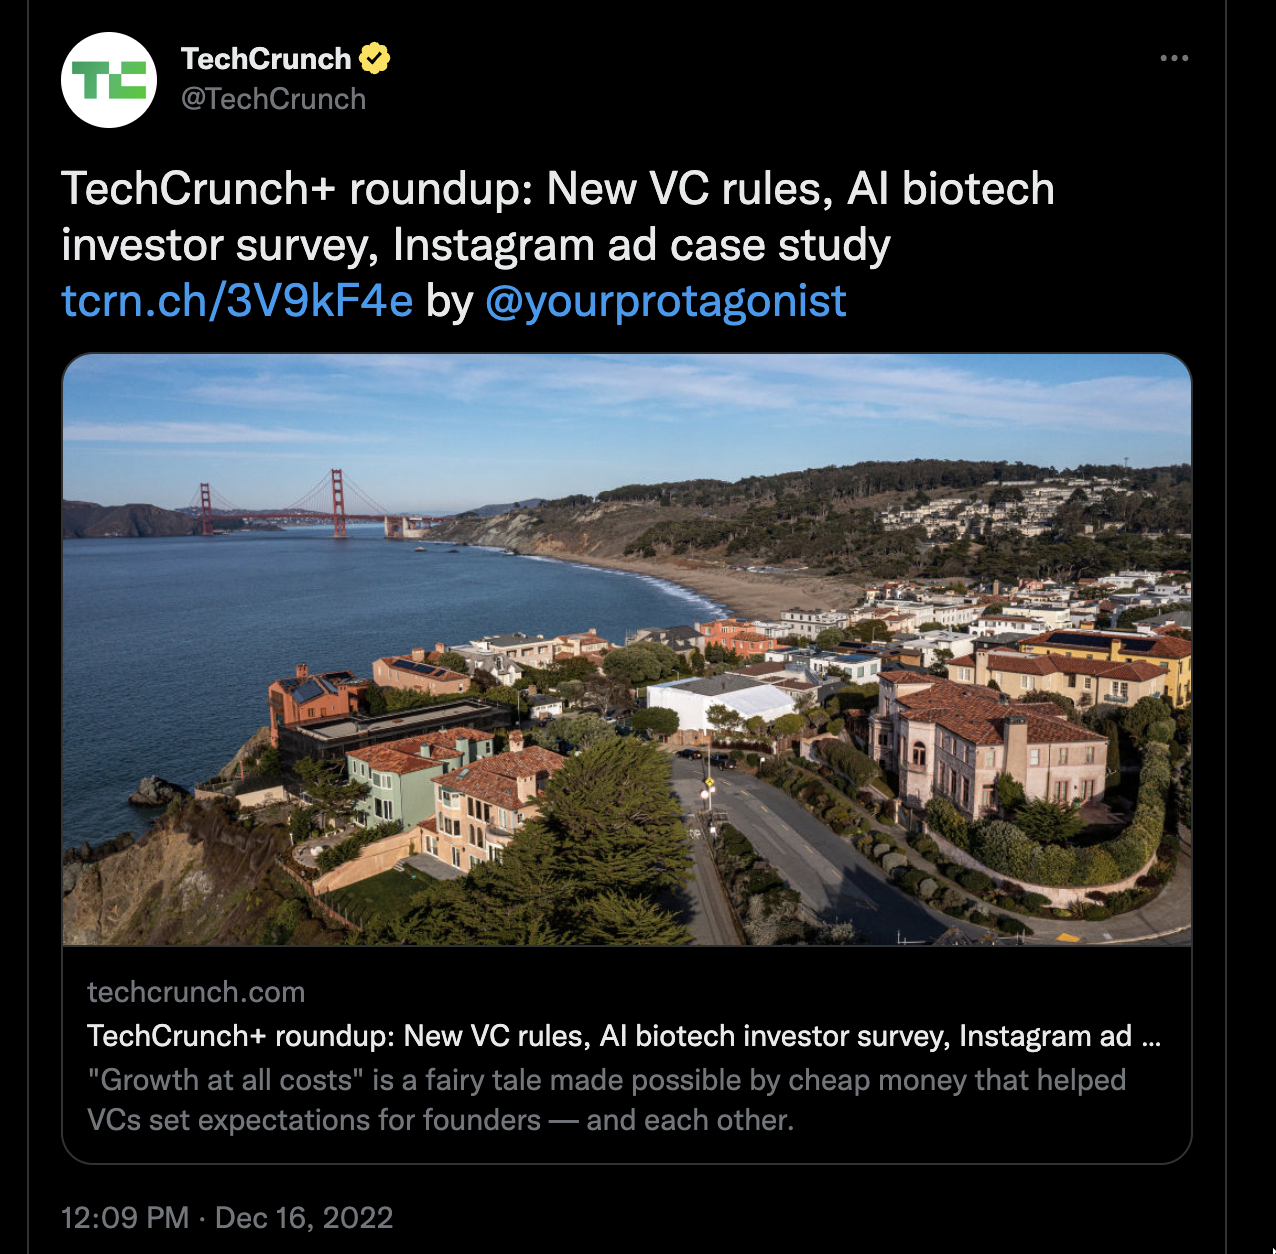 An example tweet from TechCrunch, with a summary of the article in the tweet.